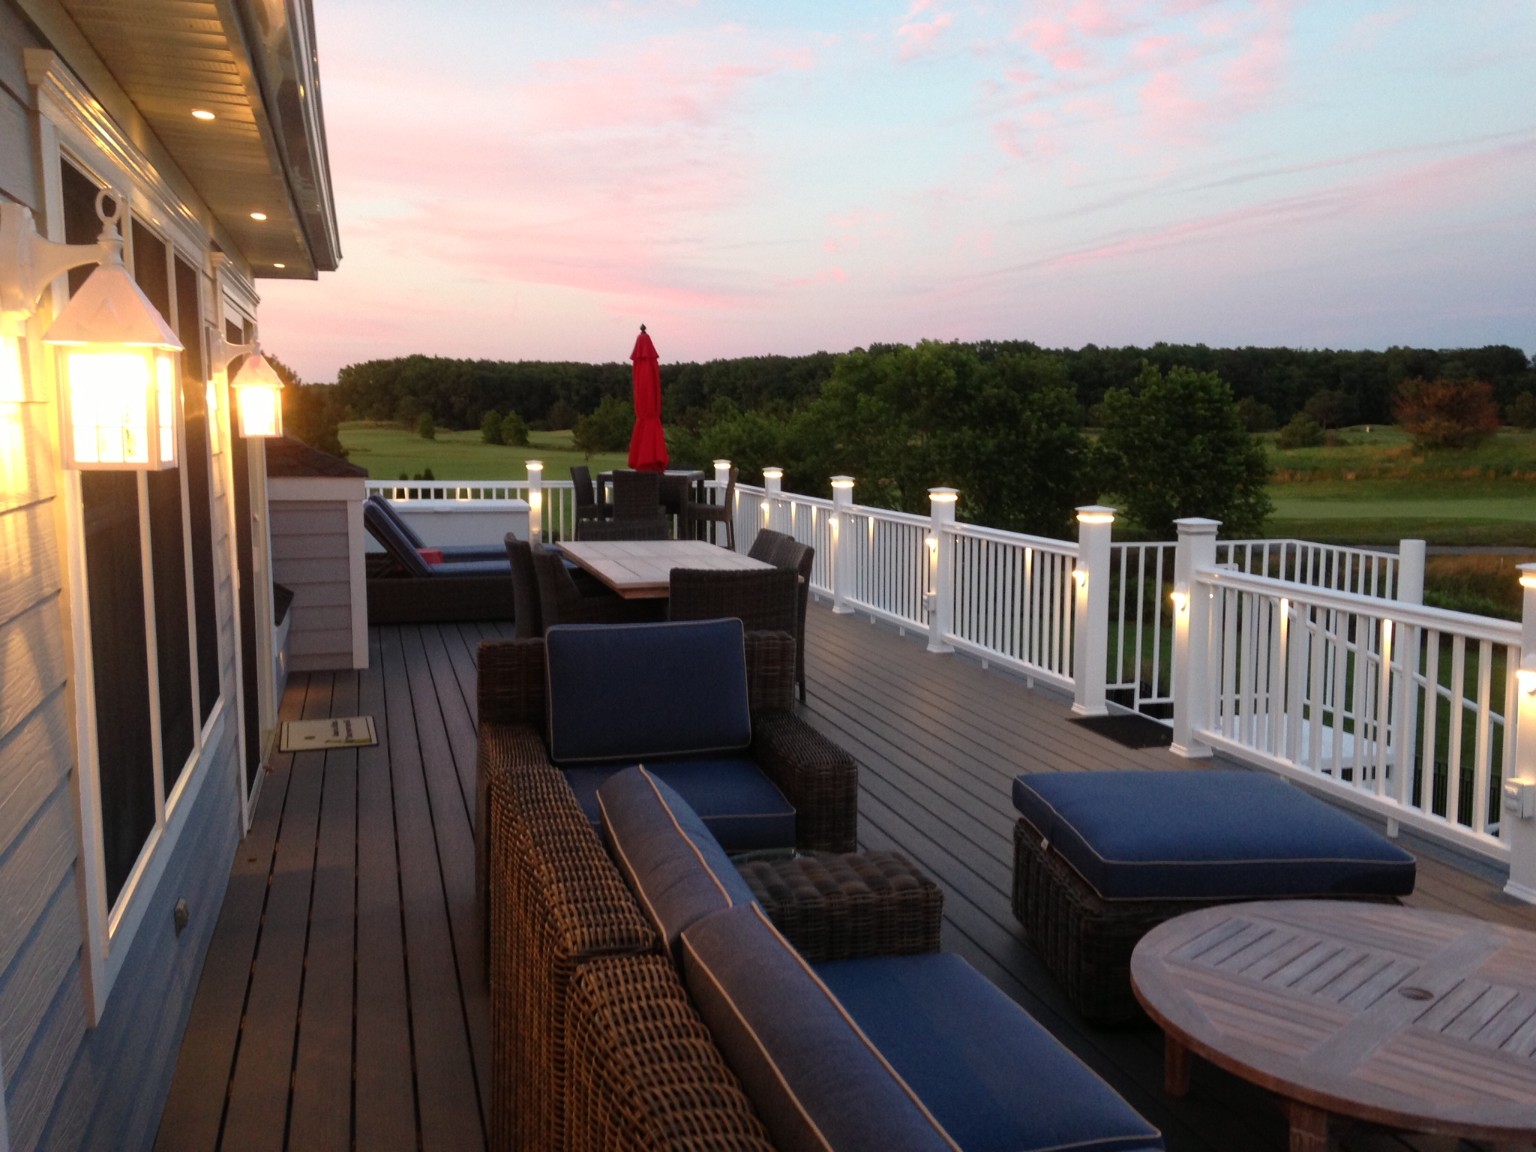 Willow Oak Deck Addition in Bear Trap Dunes, Ocean View DE with White Vinyl Railing with Lights and Round Table